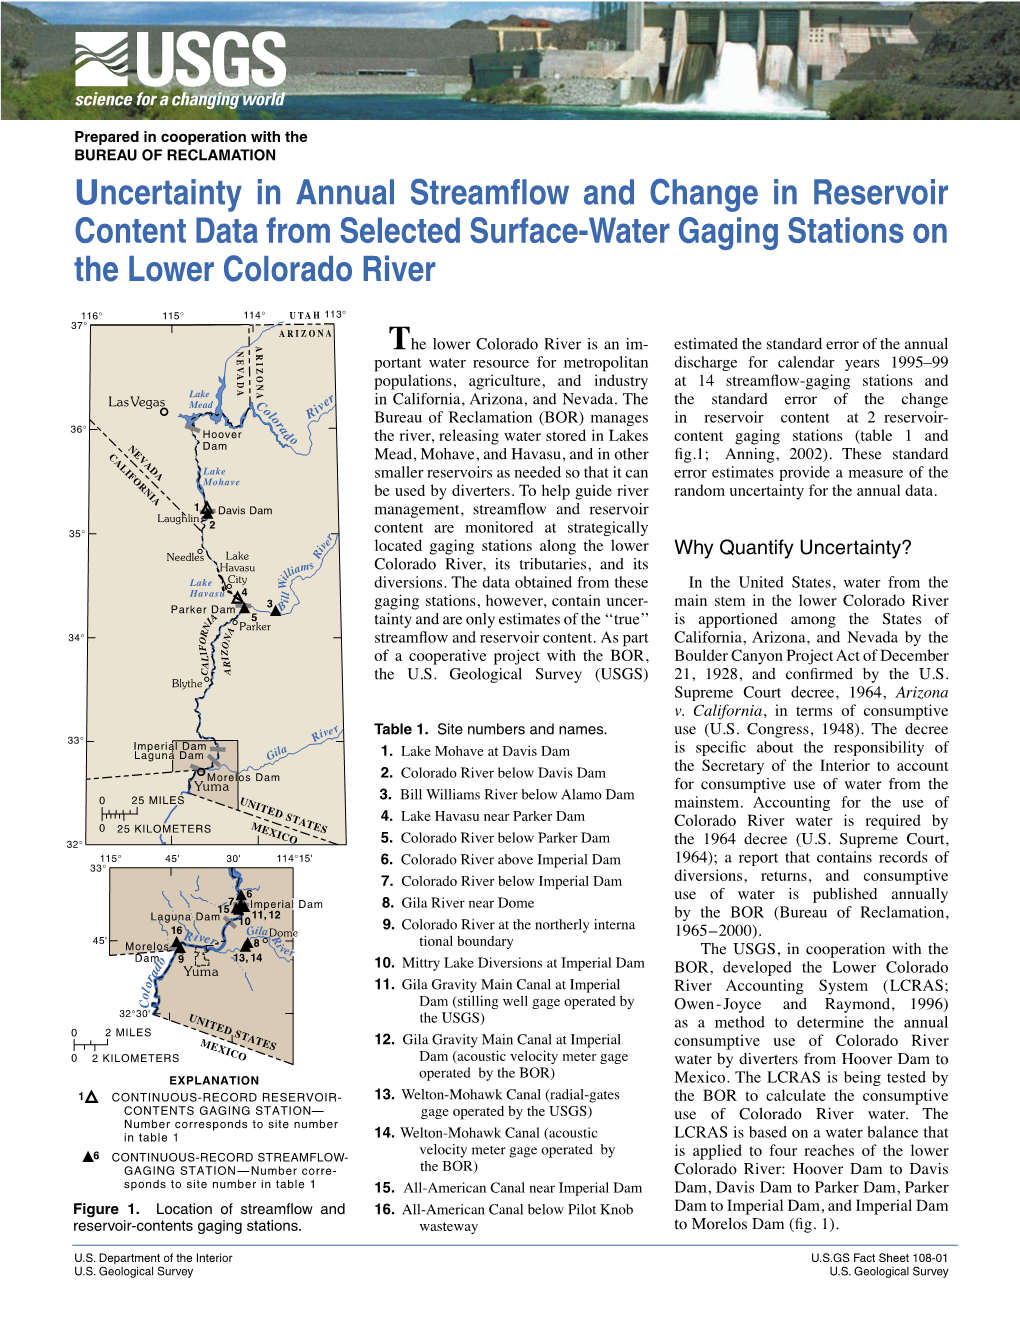 Uncertainty in Annual Streamflow and Change in Reservoir Content Data from Selected Surface-Water Gaging Stations on the Lower Colorado River